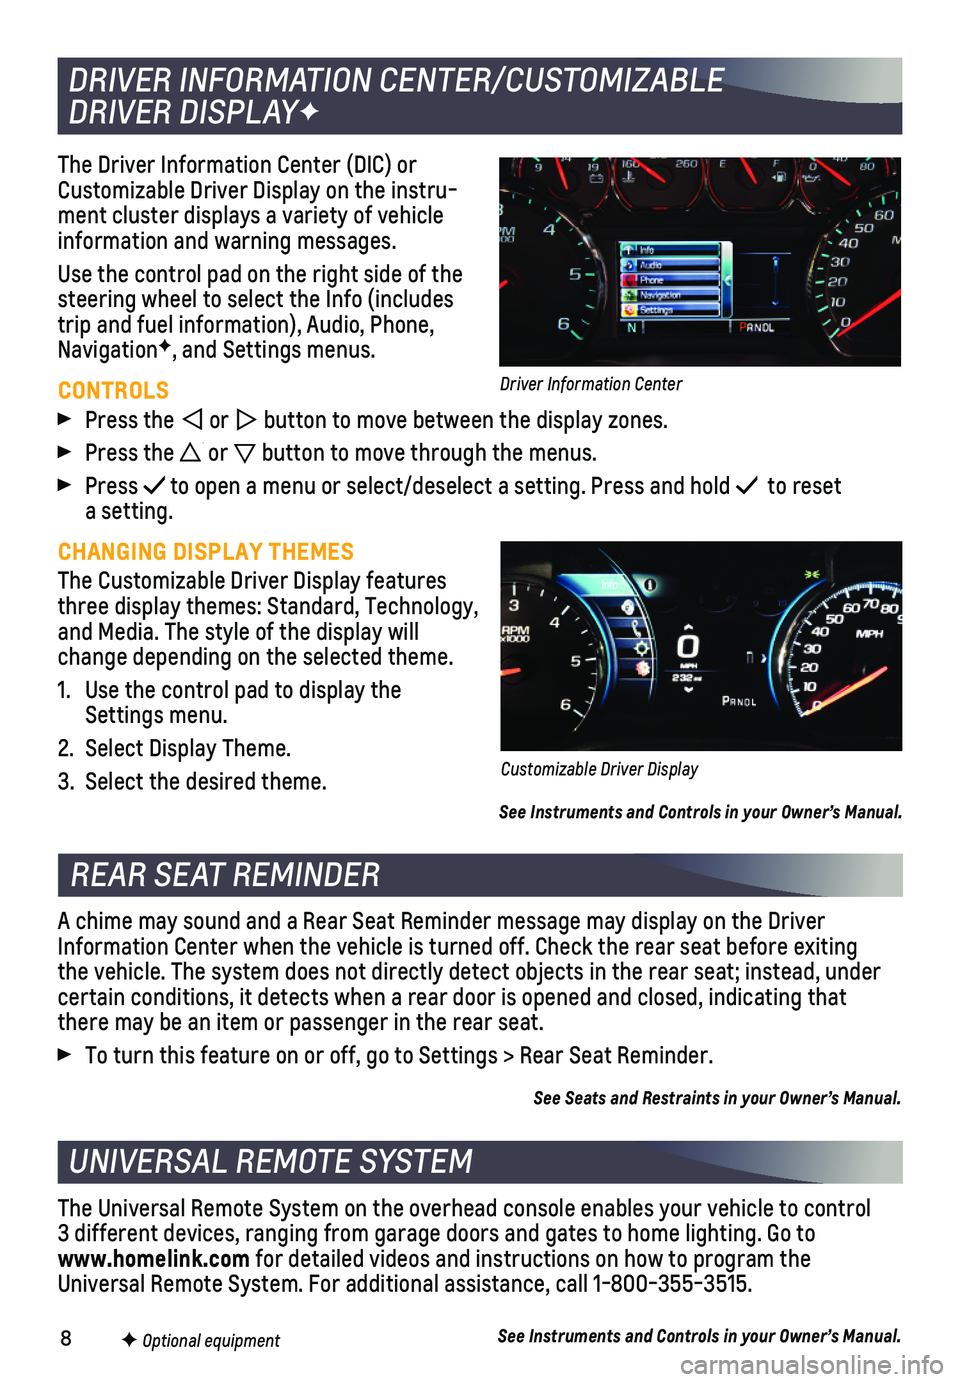 CHEVROLET TAHOE 2018  Get To Know Guide 8
The Driver Information Center (DIC) or Customizable Driver Display on the instru-ment cluster displays a variety of vehicle information and warning messages.
Use the control pad on the right side of